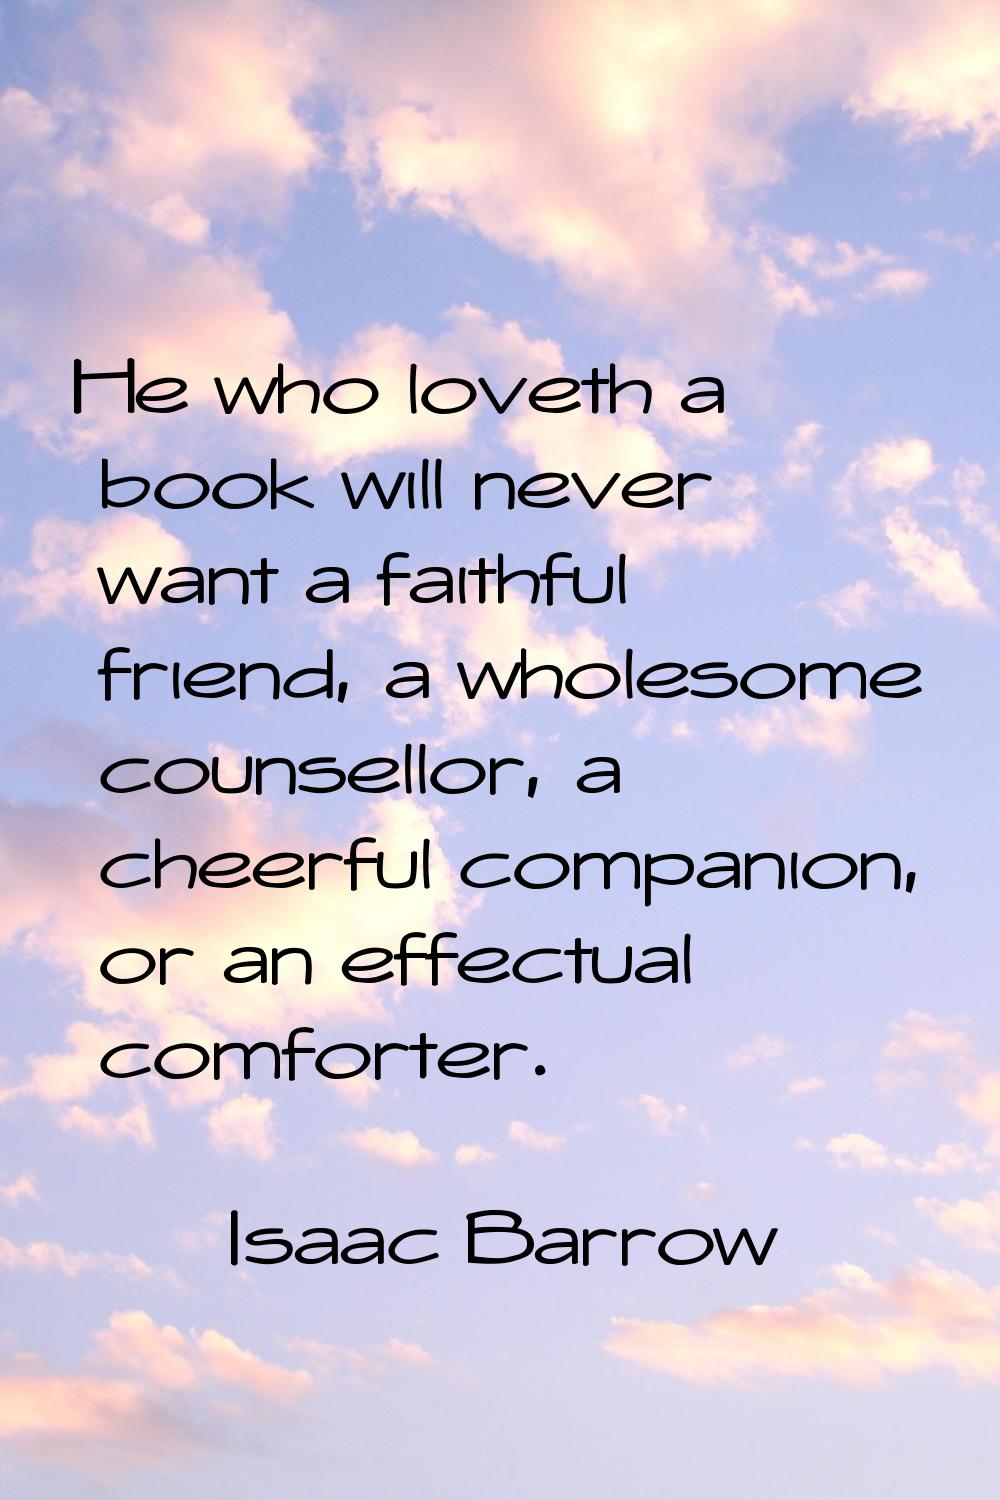 He who loveth a book will never want a faithful friend, a wholesome counsellor, a cheerful companio